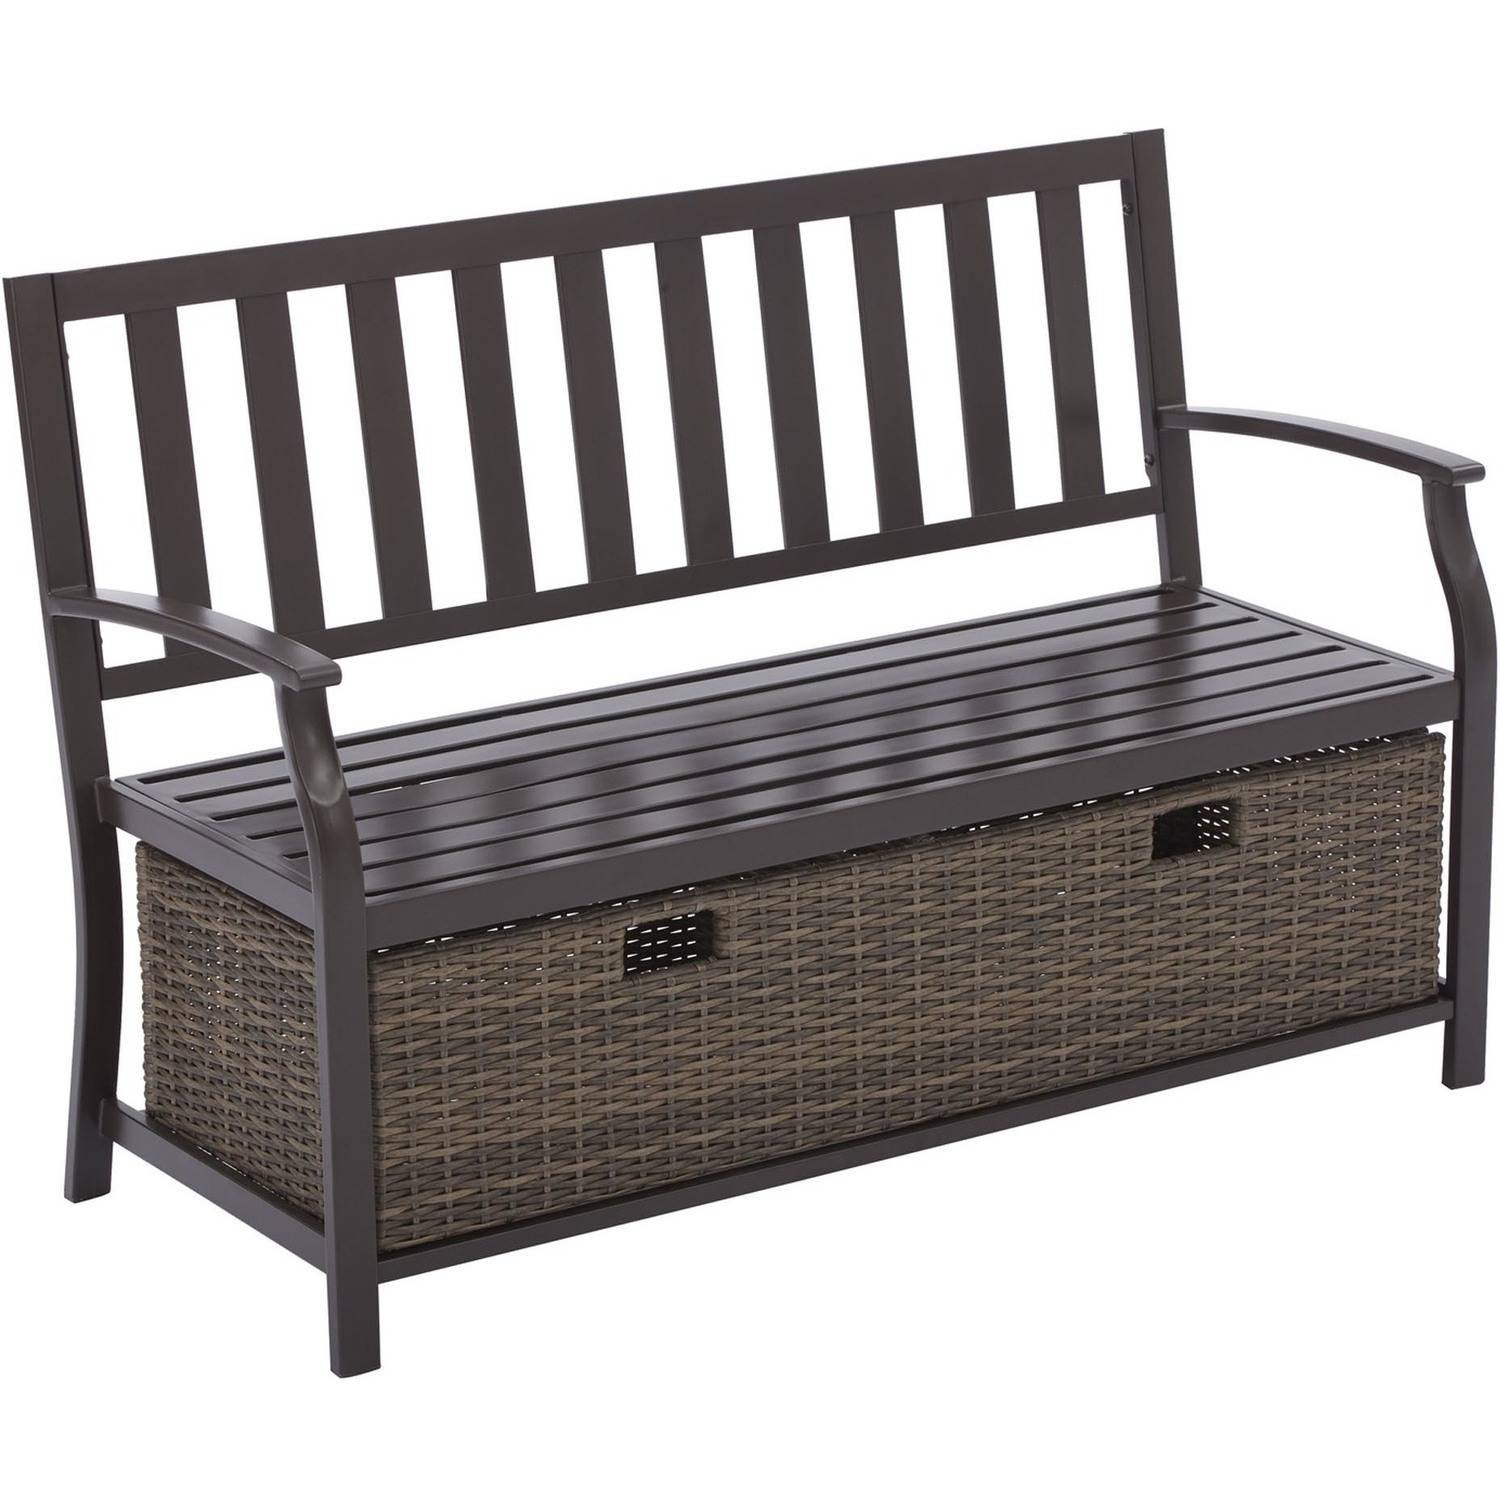 Better Homes & Gardens Camrose Farmhouse Steel Outdoor Bench with Wicker Storage Box, Bronze/Brown - image 2 of 11